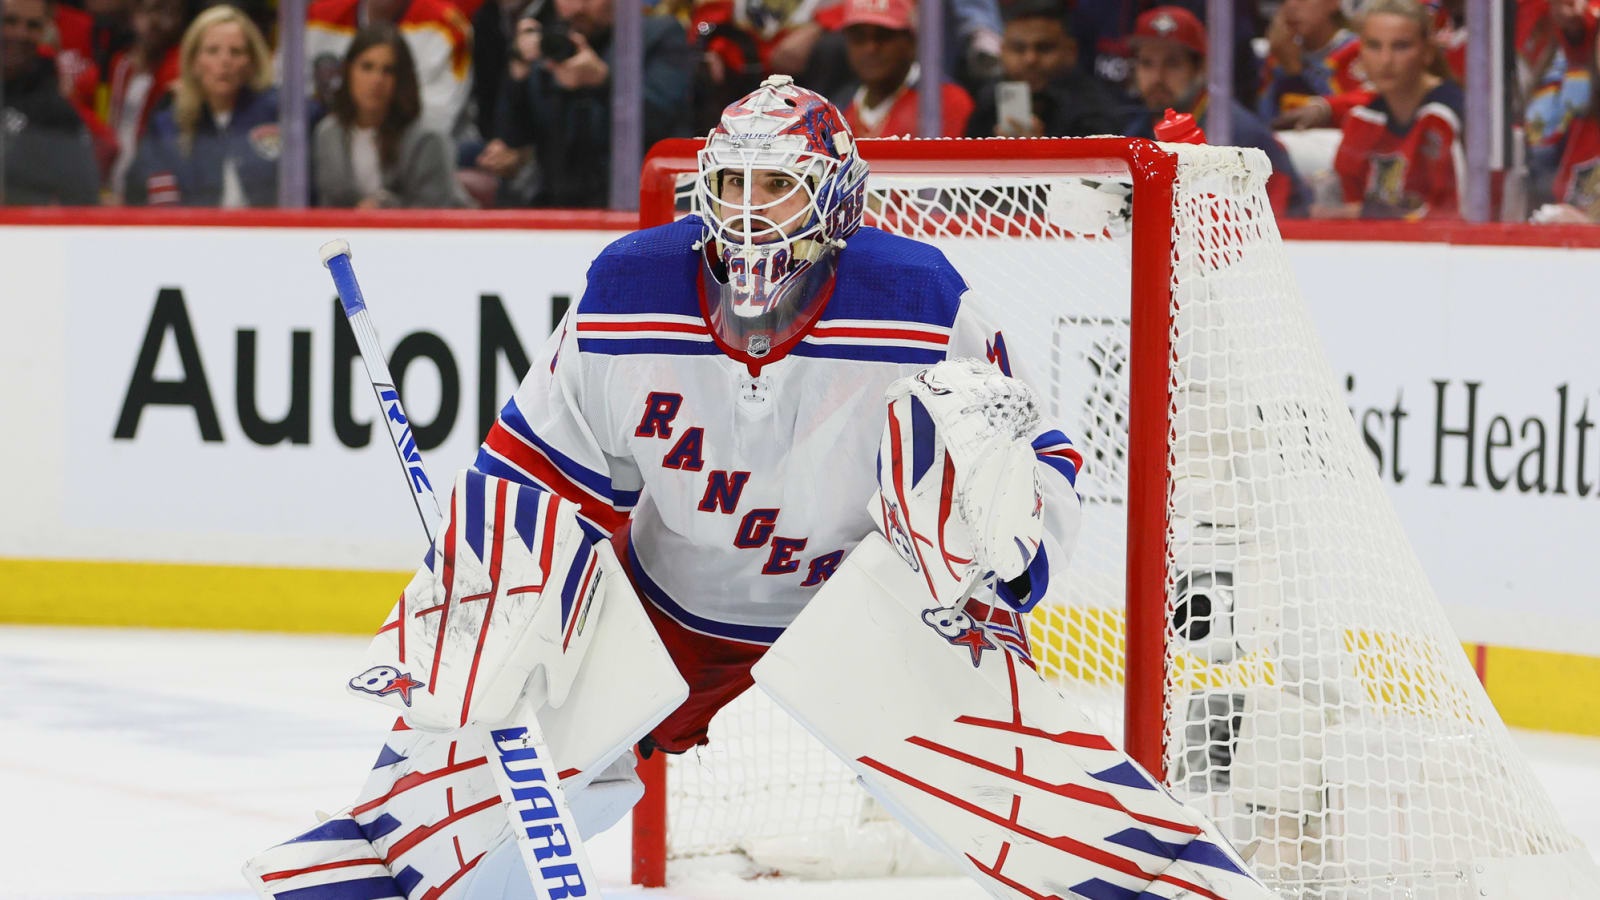 The Clock To Extend Shesterkin Set to Begin for the Blueshirts